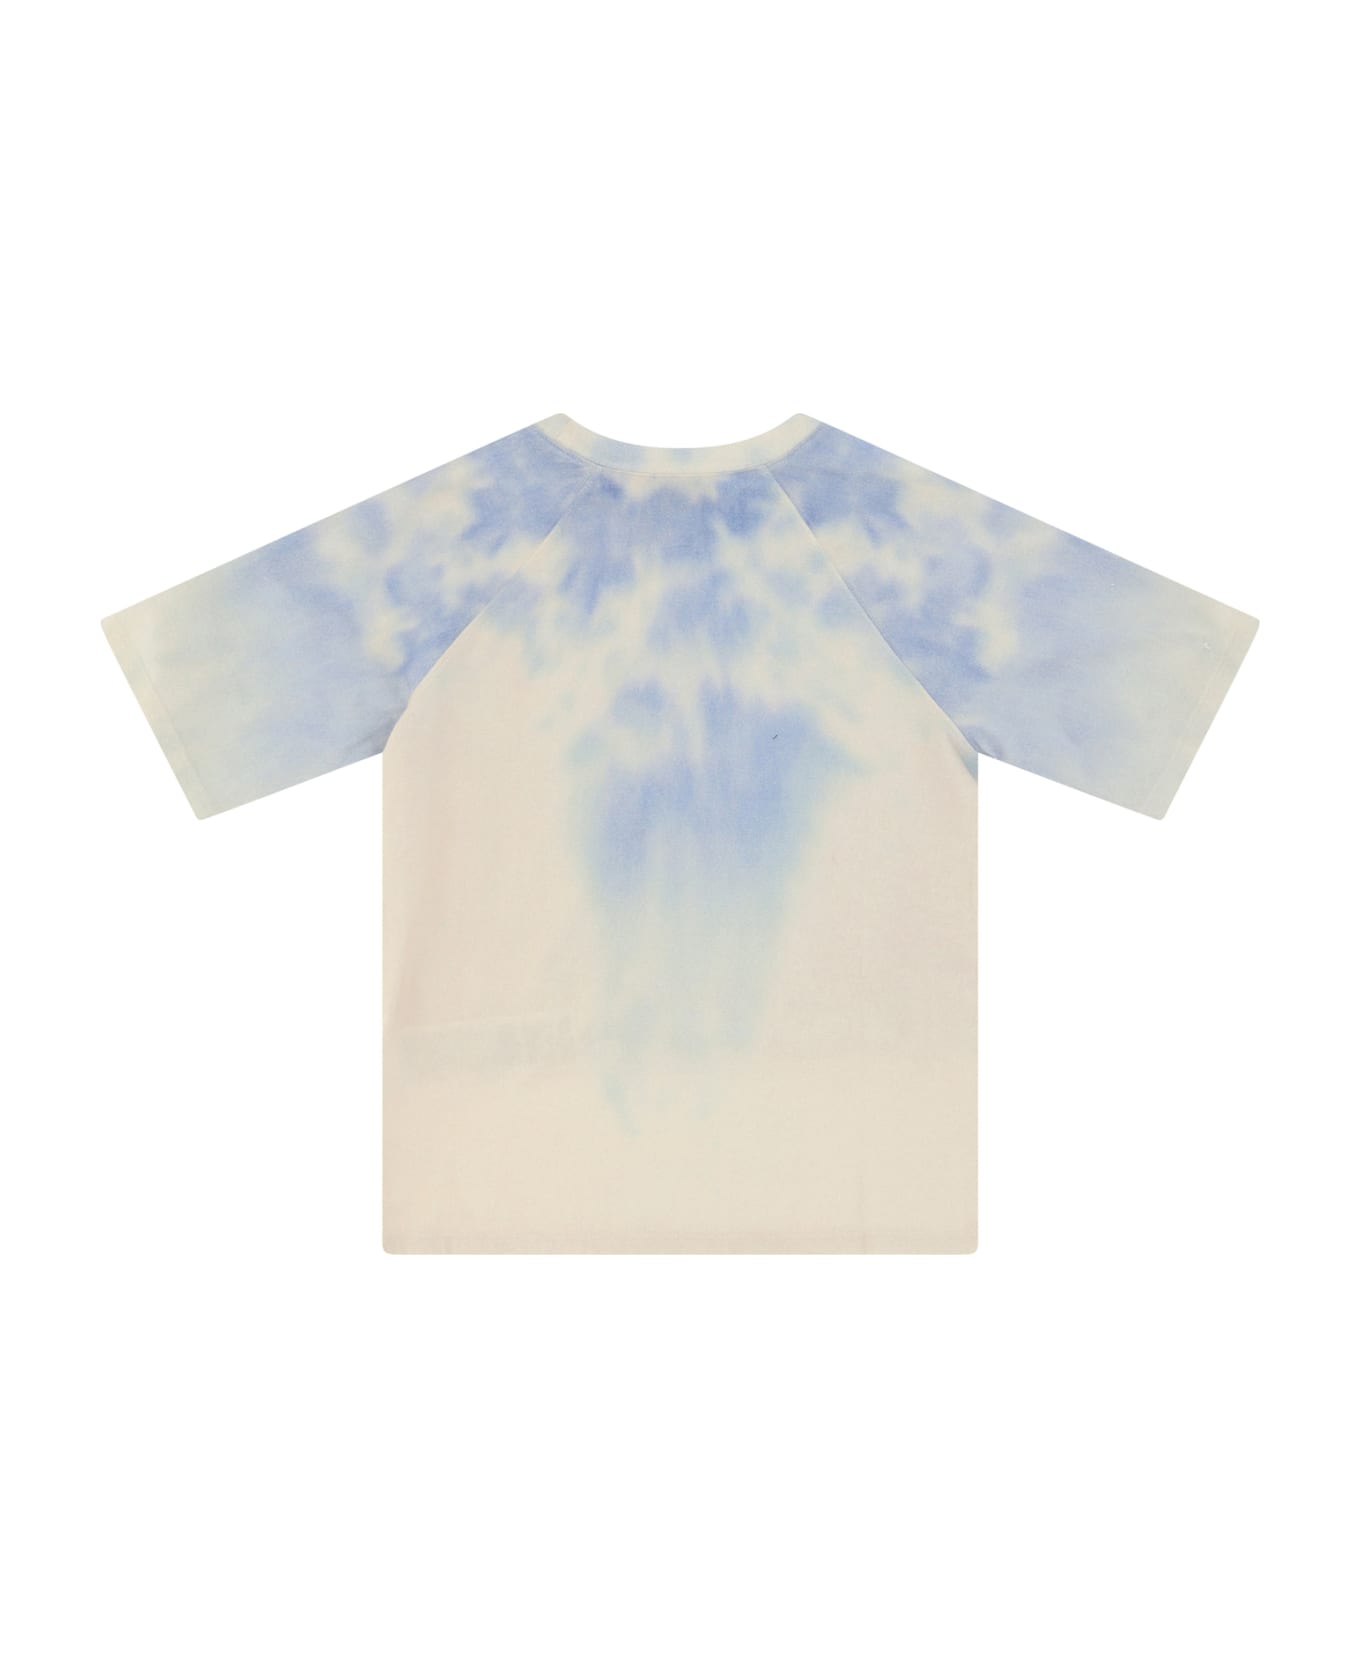 Gucci T-shirt For Boy - Dusty White/blue トップス